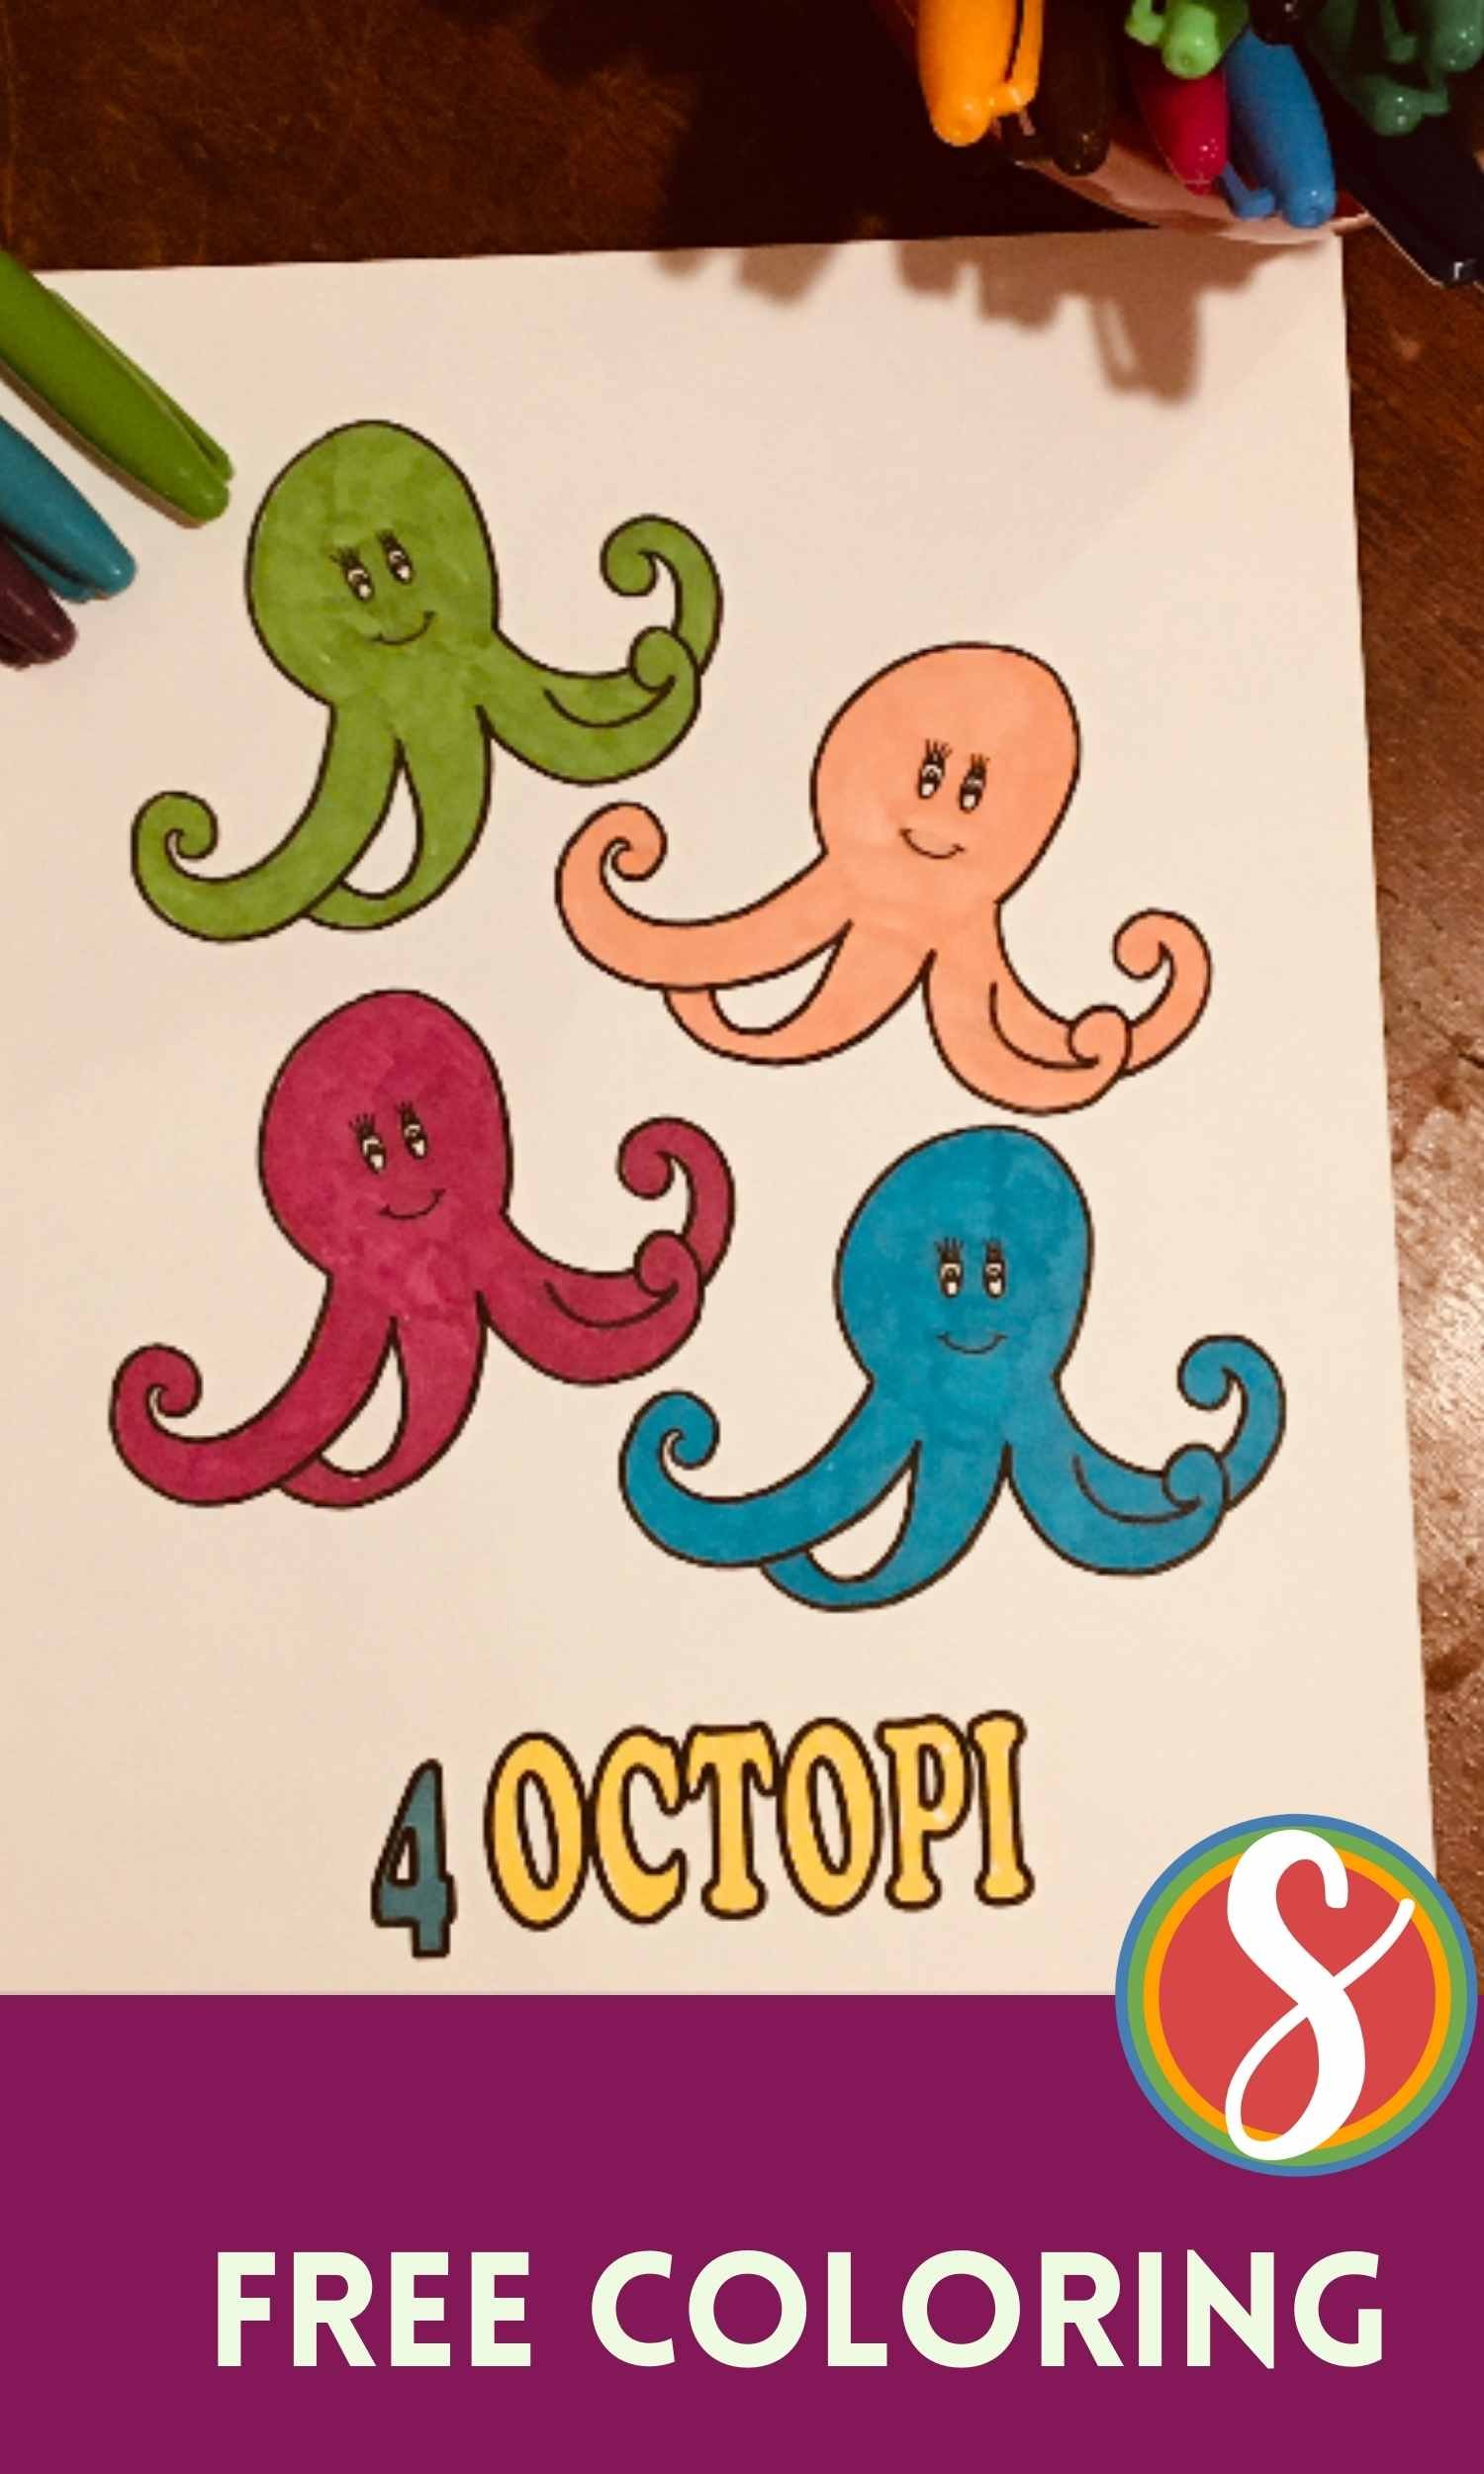 a colored coloring page with 4 simple octopuses, one green, one  orange, one magenta, one blue